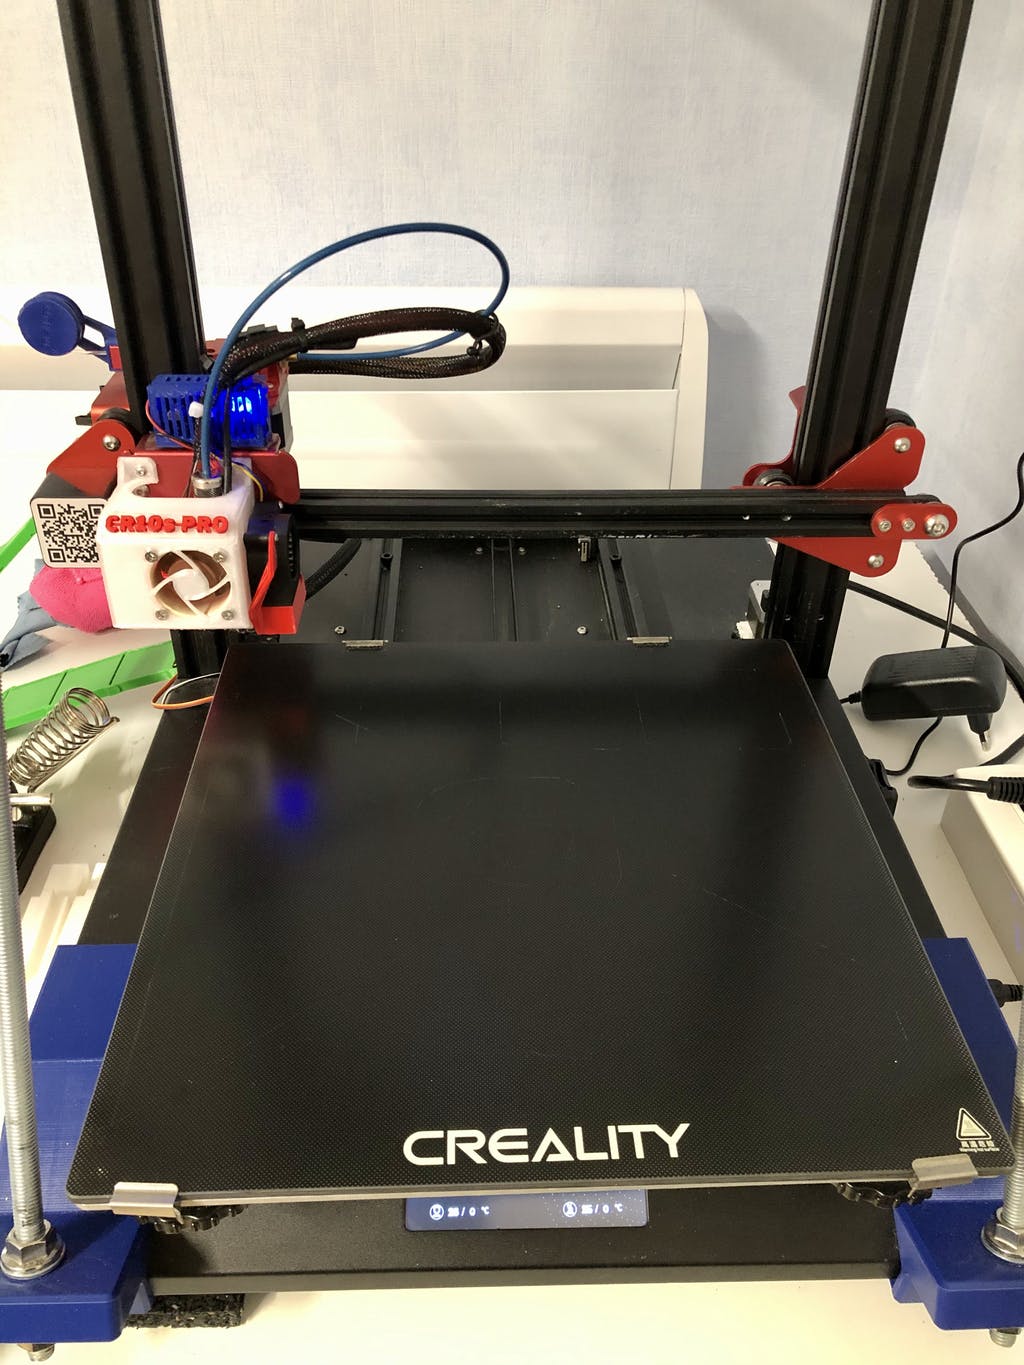 Creality 3D CR-10S Pro Glass Bed Tempered Glass Upgraded Build Plate Printing Surface for Heated Bed 310mmx320mmx4mm for CR-10S Pro V2/CR-X